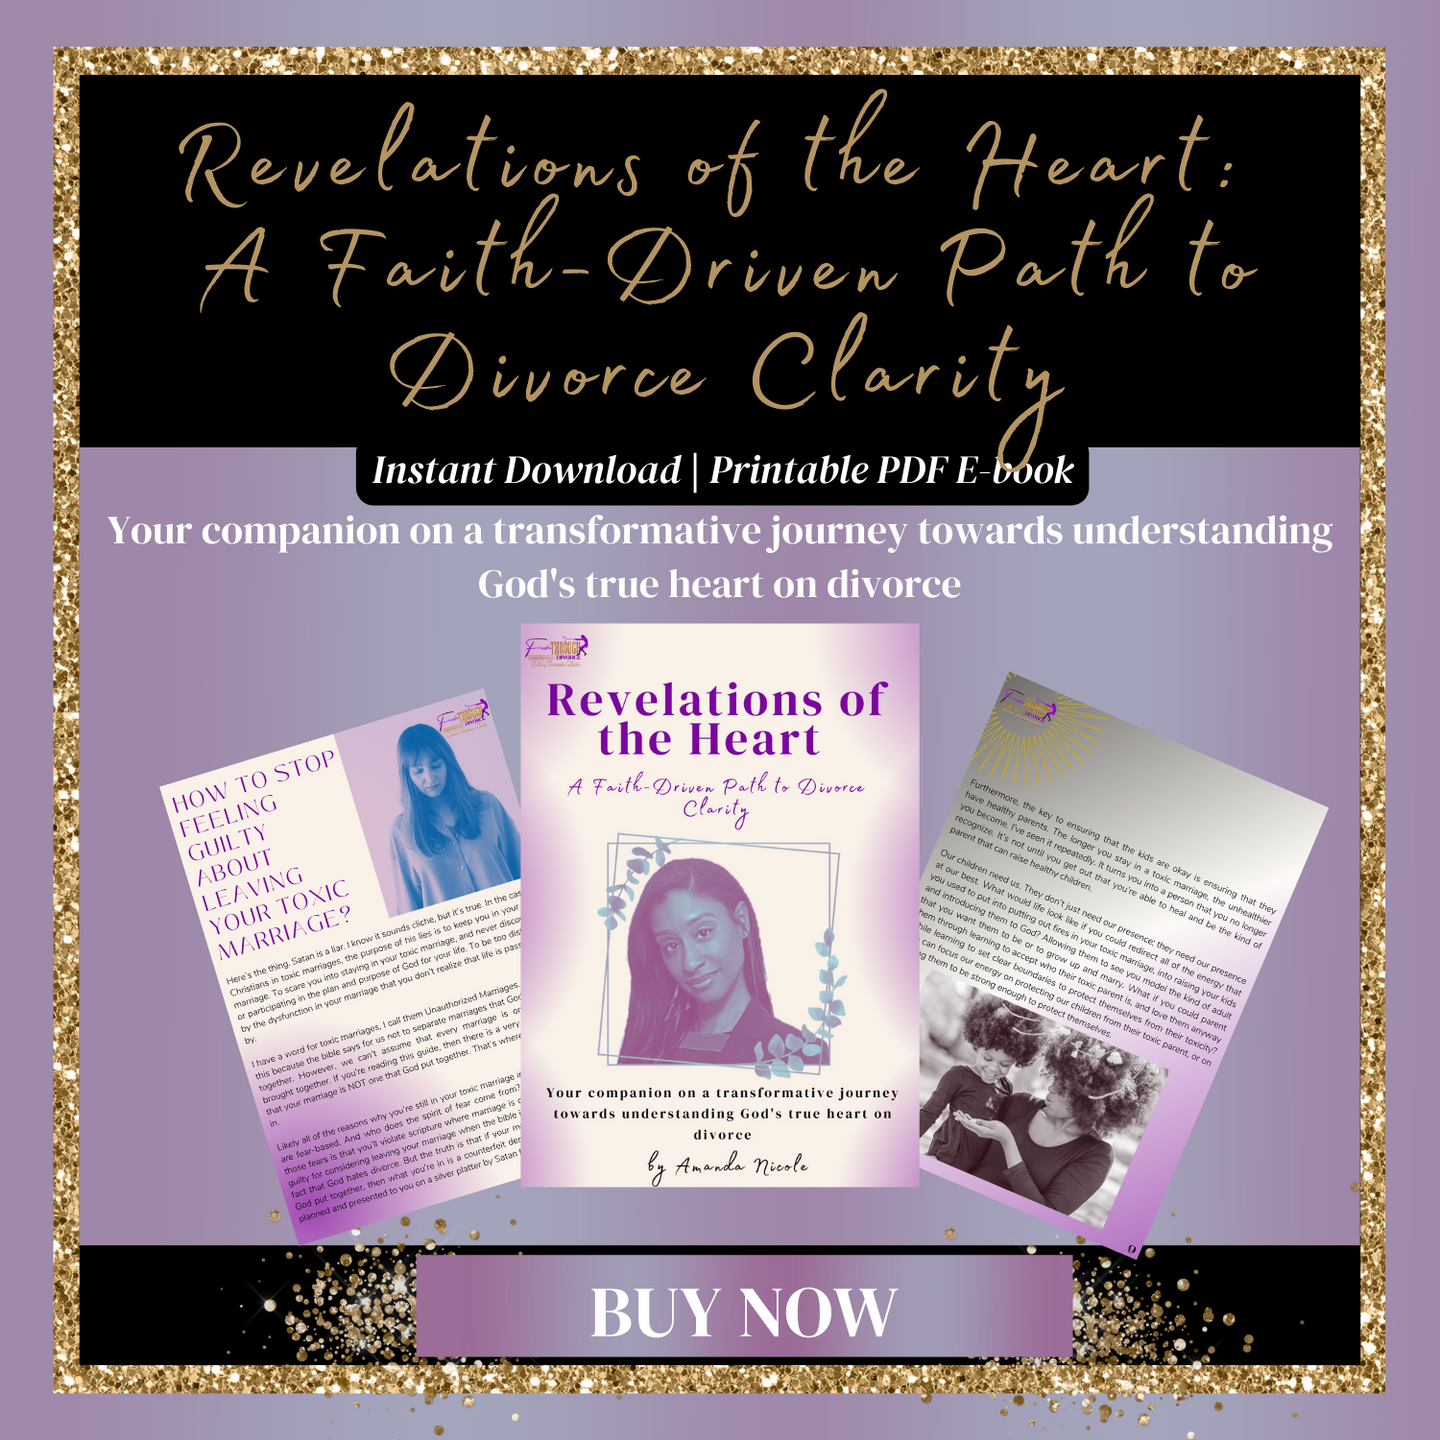 Revelations of the Heart: A Faith-Driven Path to Divorce Clarity E-Book (PDF Download)